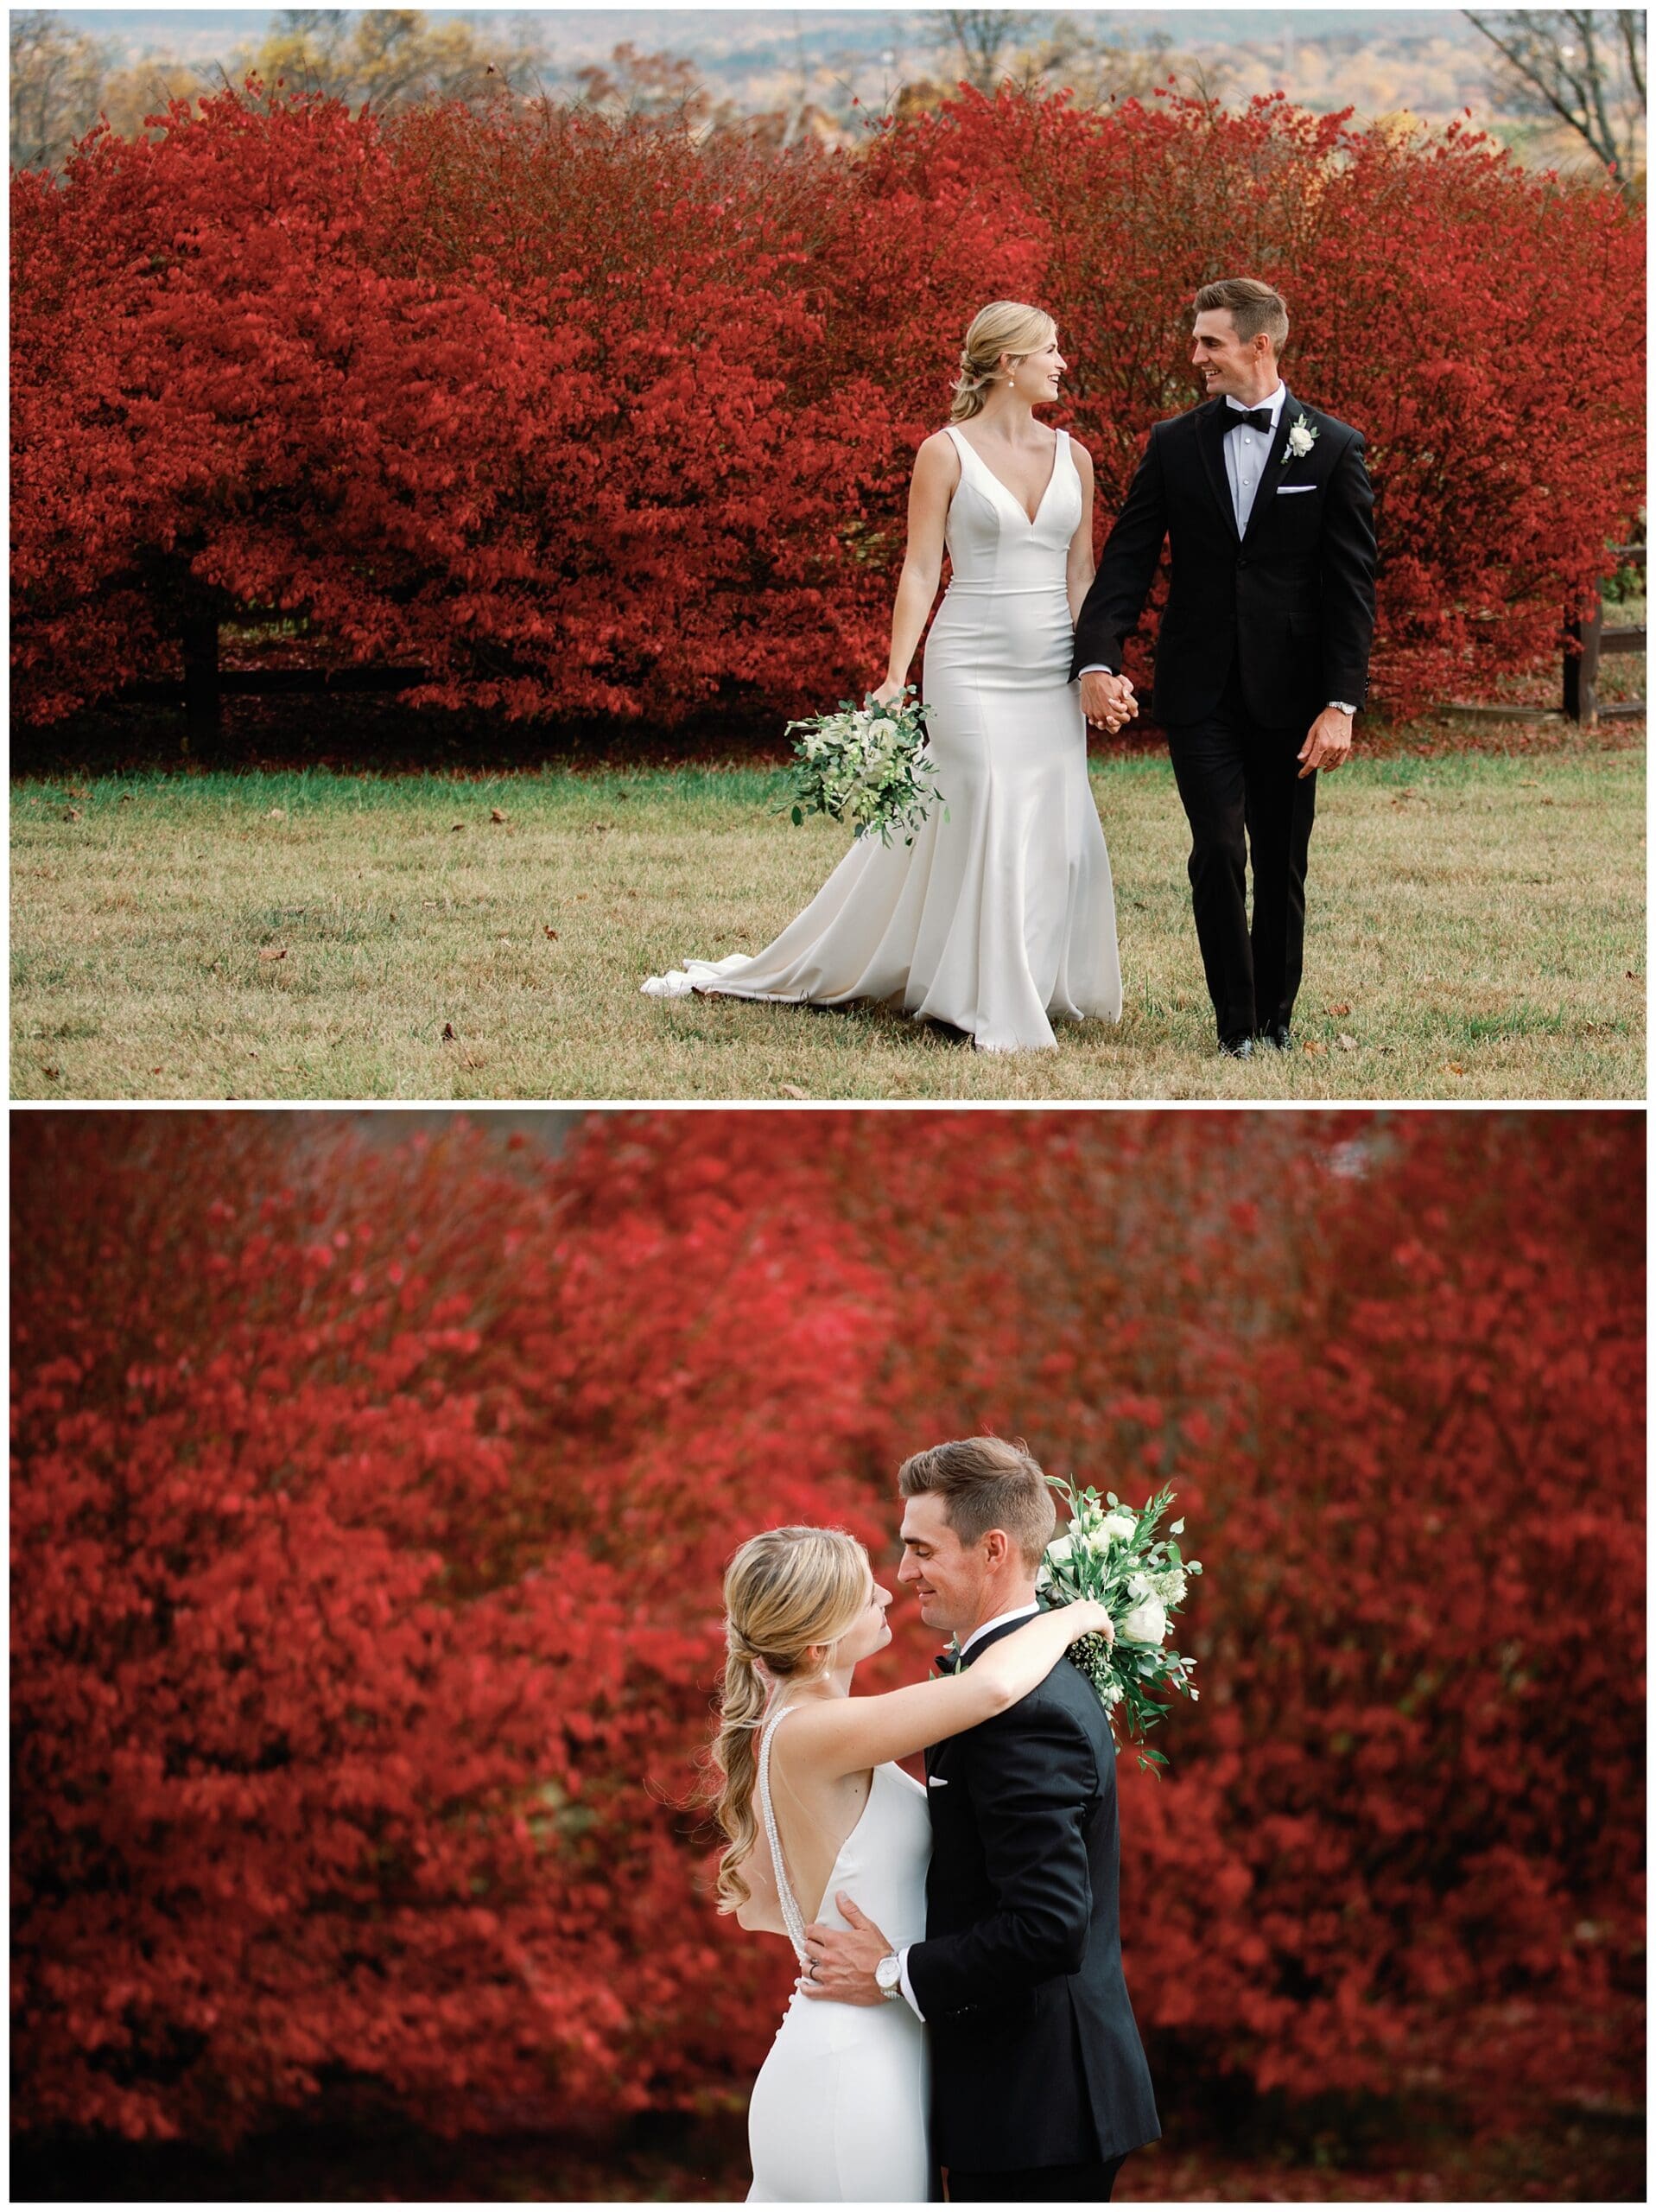 A bride and groom standing in front of red bushes at a fall wedding.